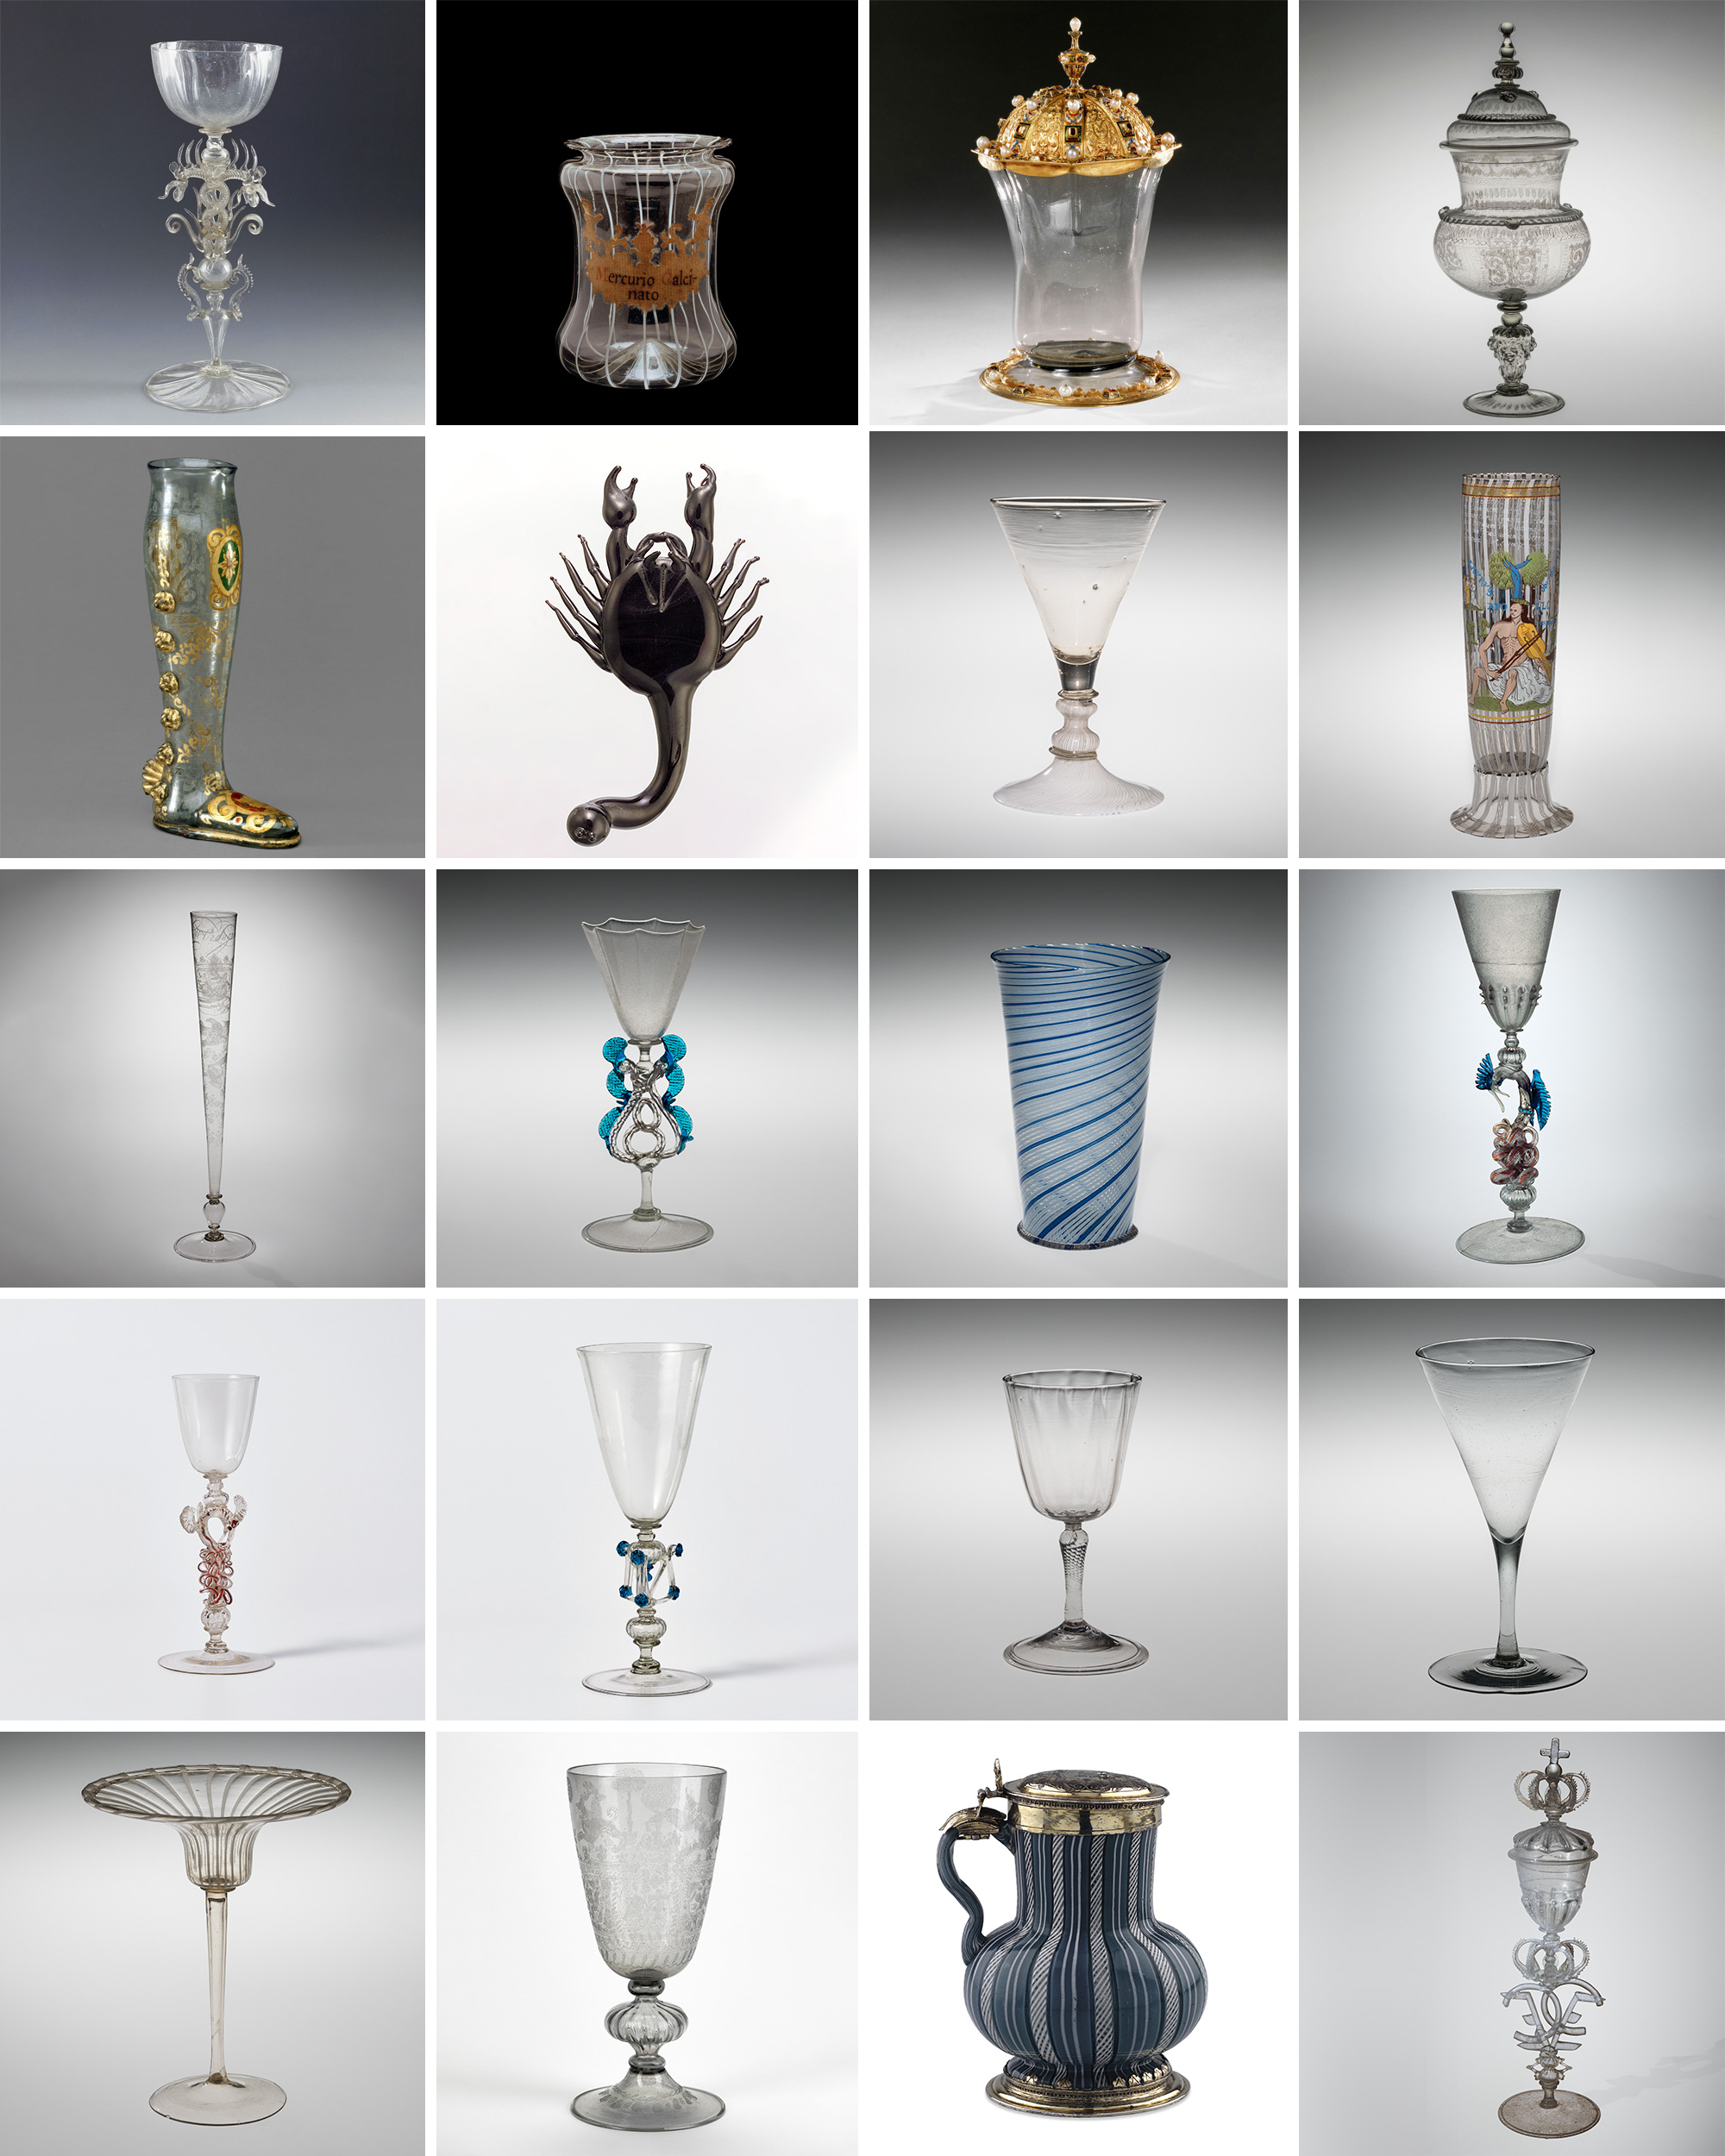 images of 20 vessels/glass objects